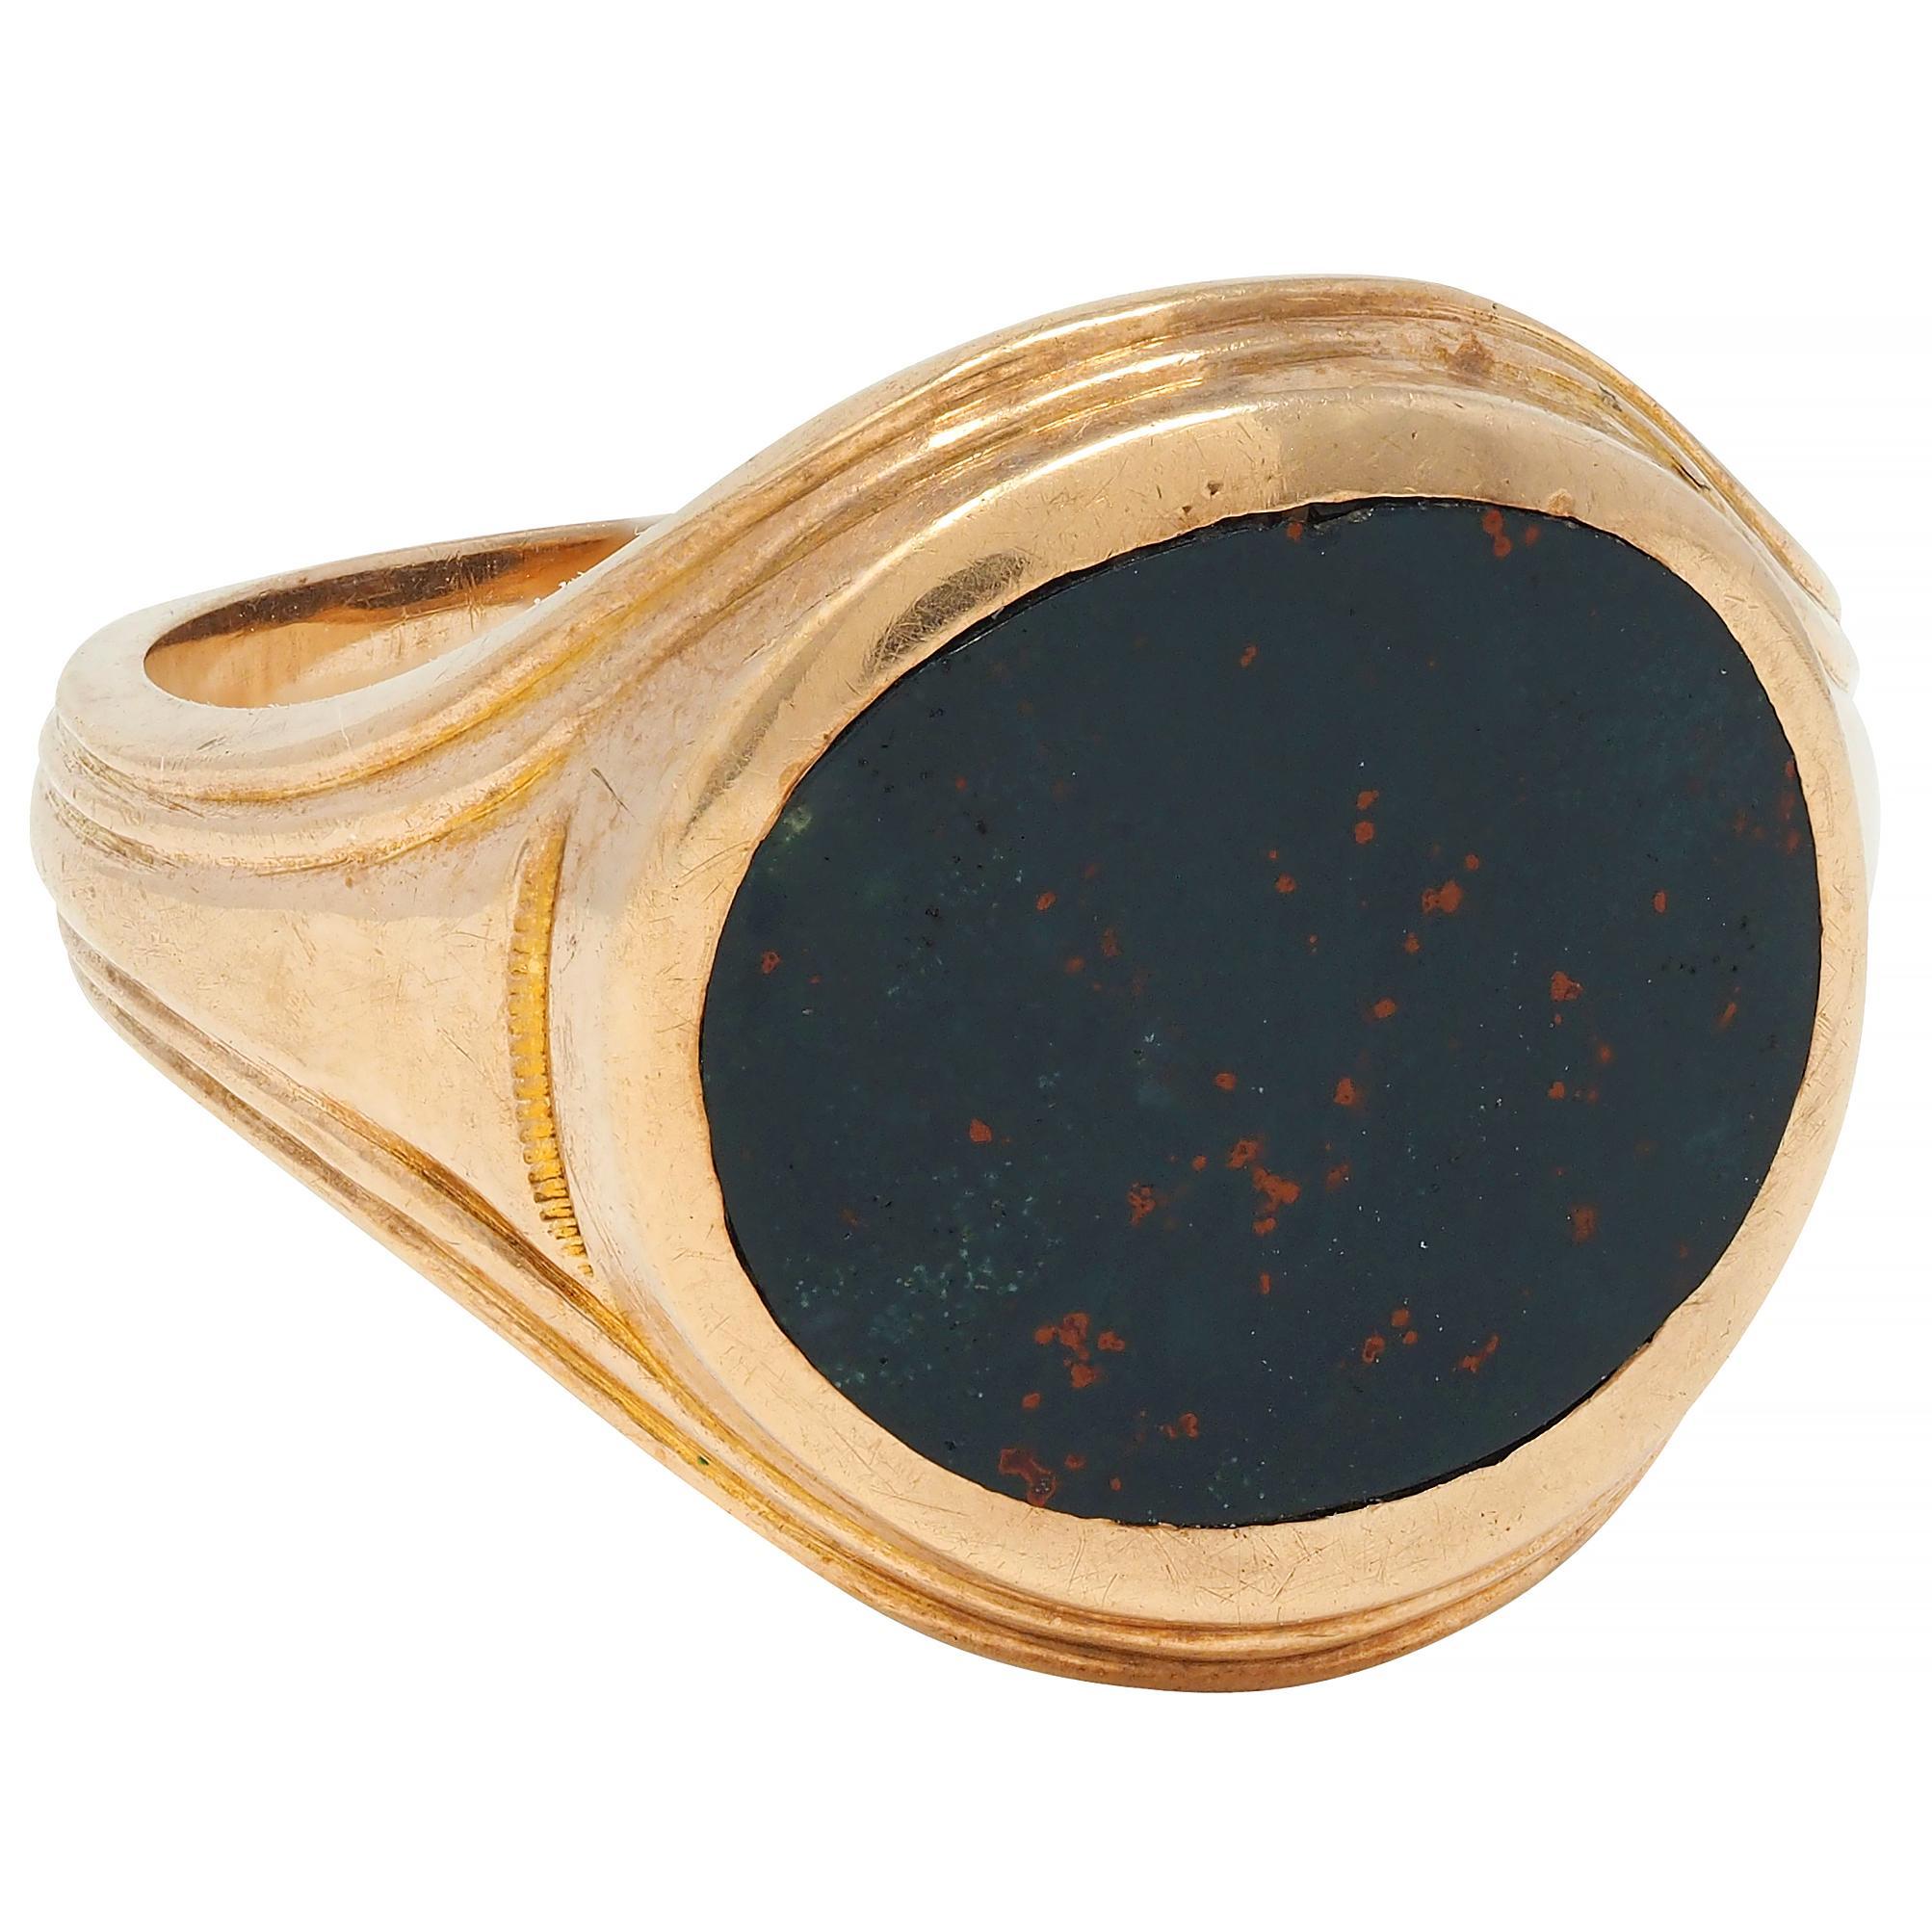 Centering an oval-shaped tablet of bloodstone measuring 12.0 x 14.0 mm 
Opaque dark bluish-green with orangy red flecking - bezel set east to west
Flanked by grooved shoulders with texture detail 
With ridged bombé shaped surround
Completed by